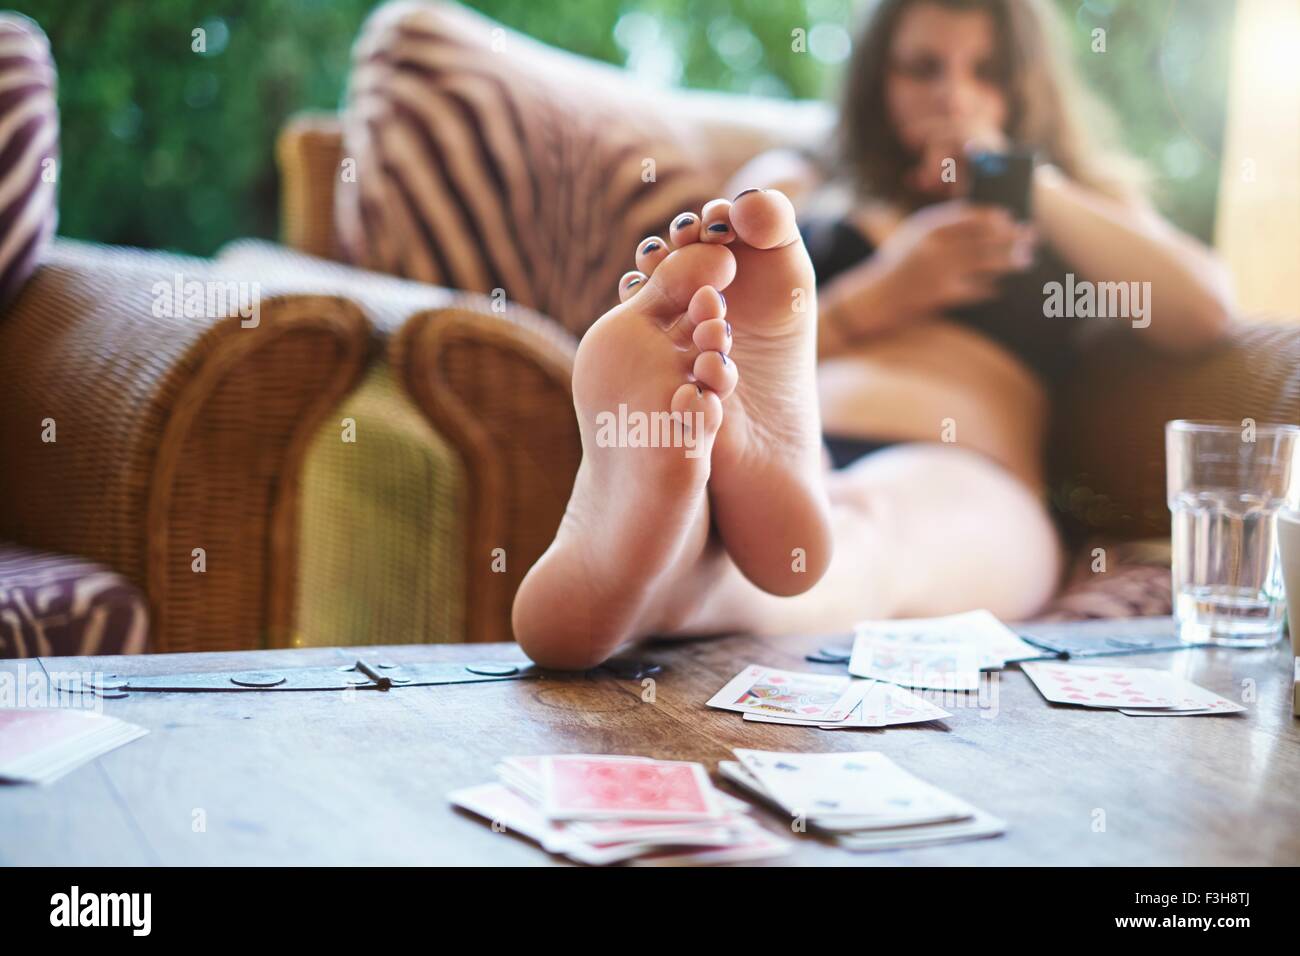 Teenage girl reading smartphone texts with feet up on patio table Stock Photo